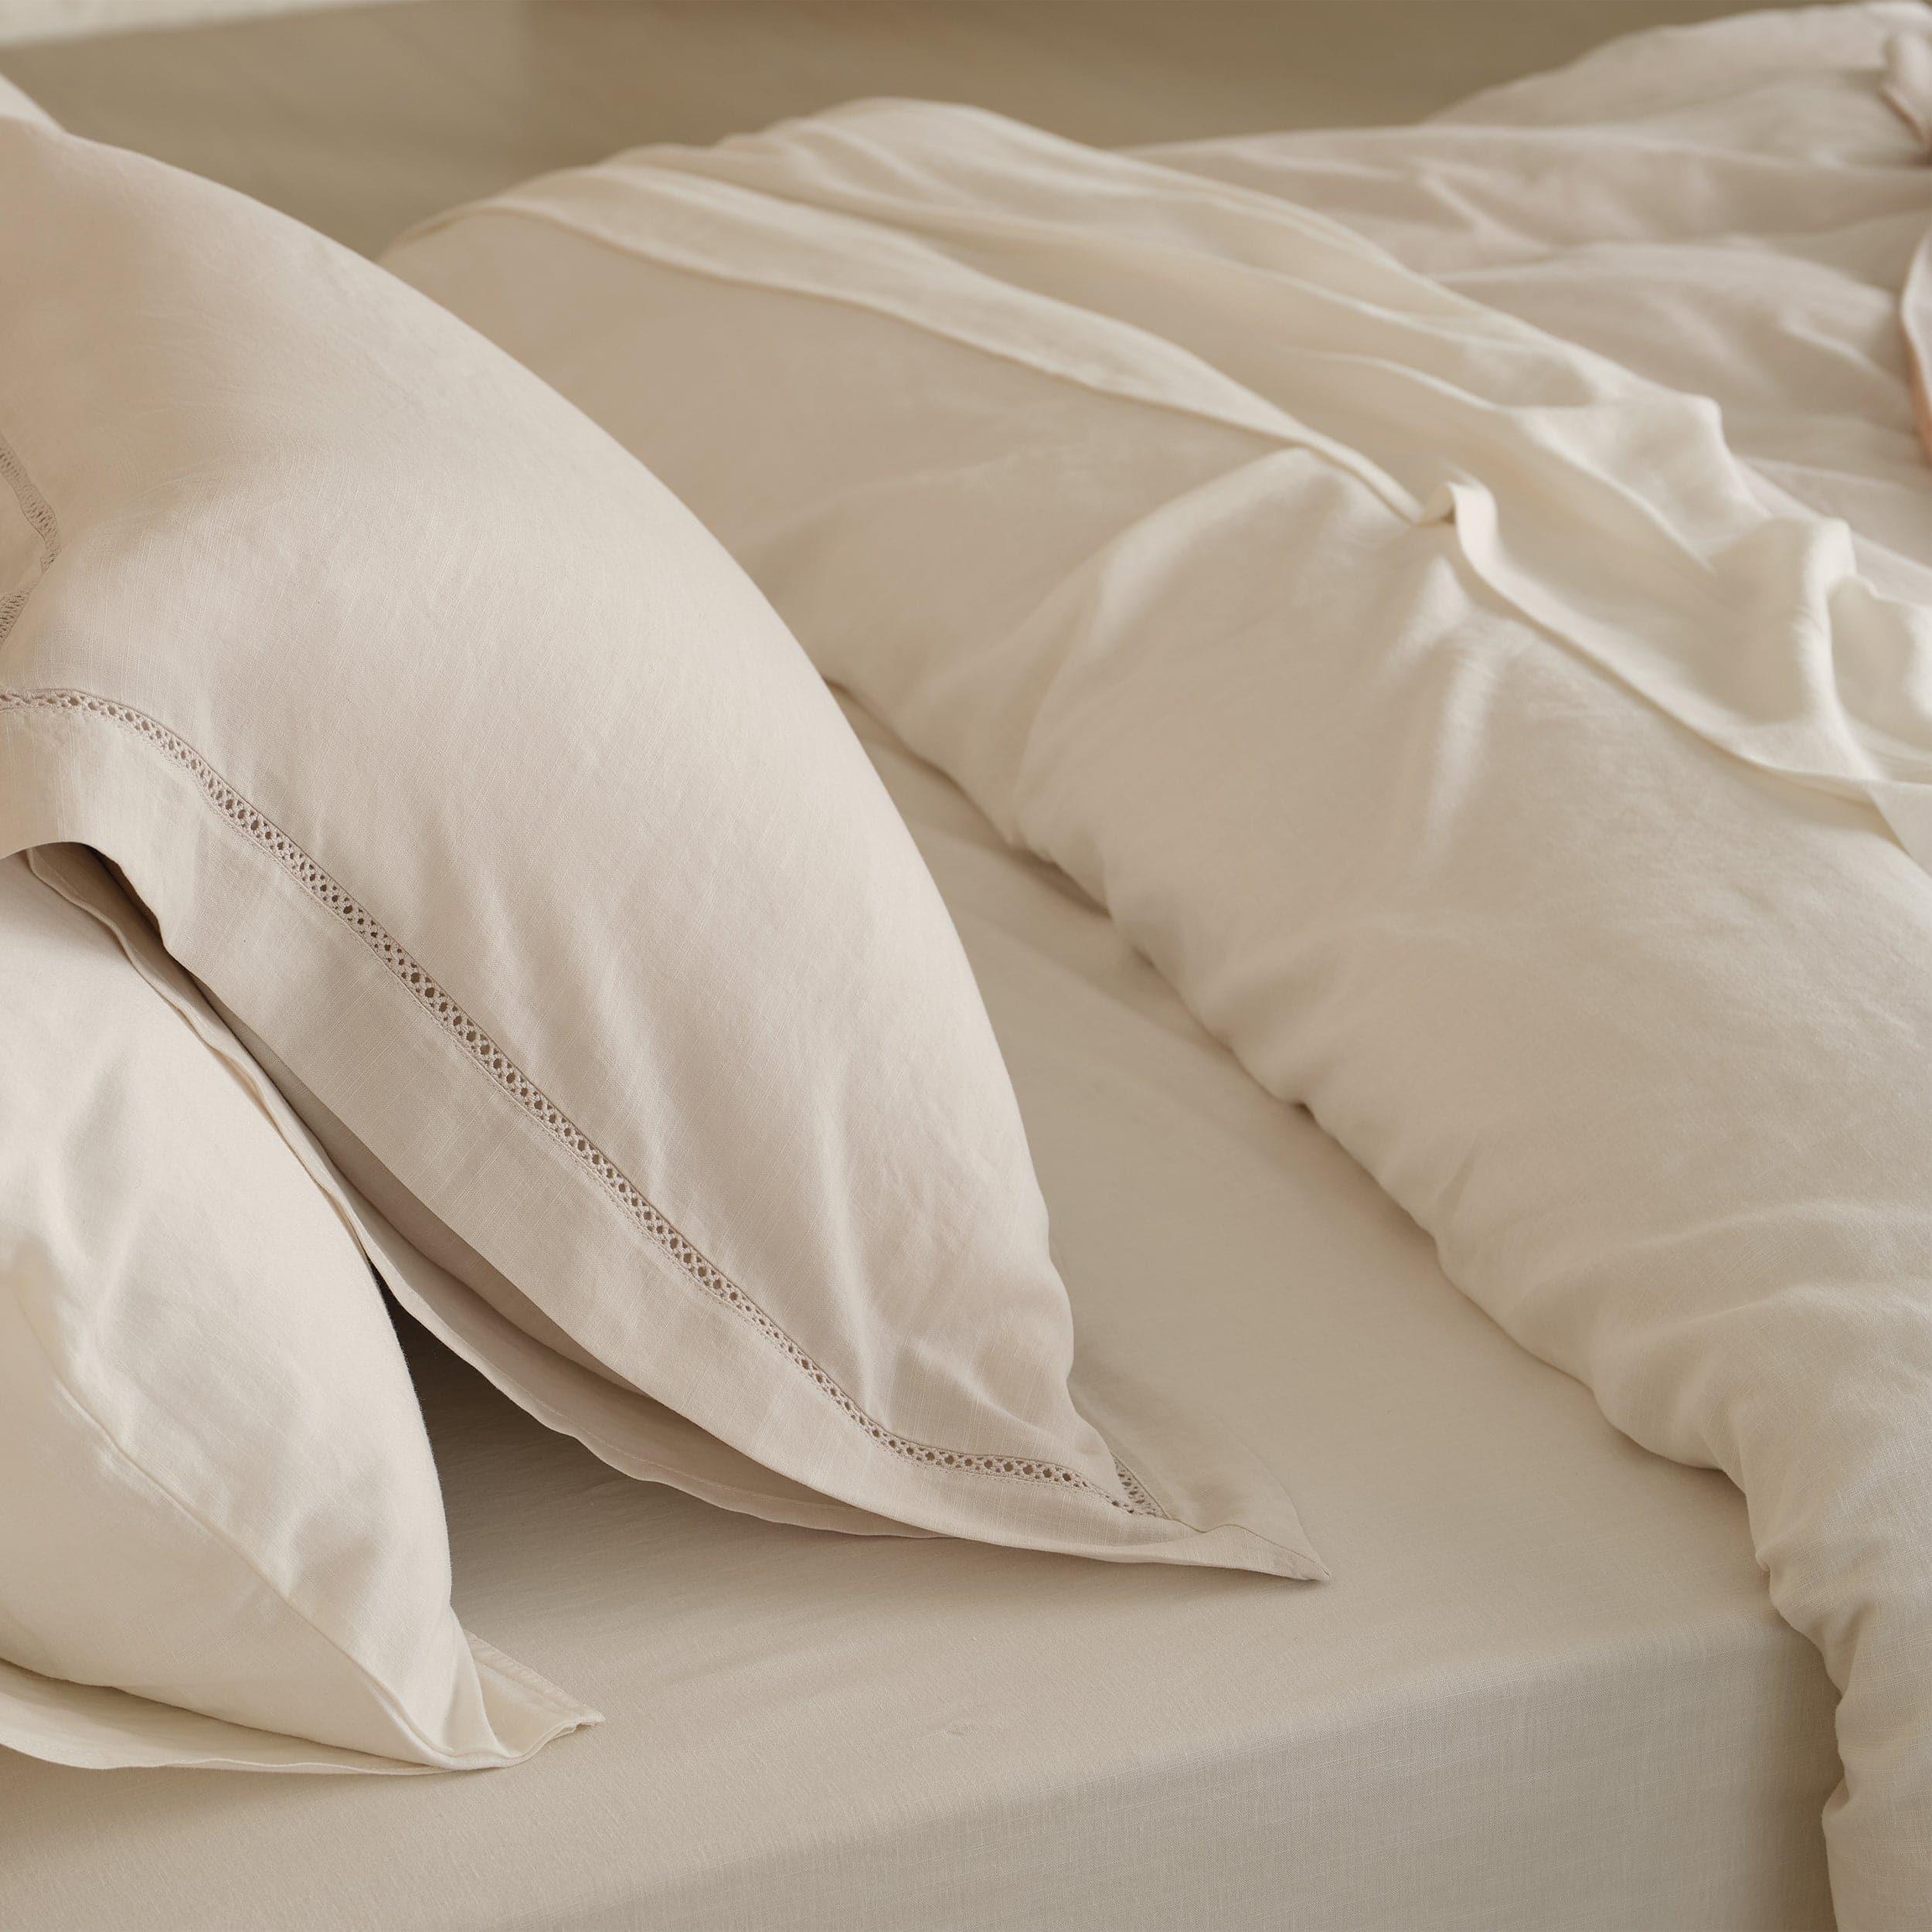 Experience the ultimate relaxation with our premium duvet cover set king, designed to provide a peaceful night's sleep.